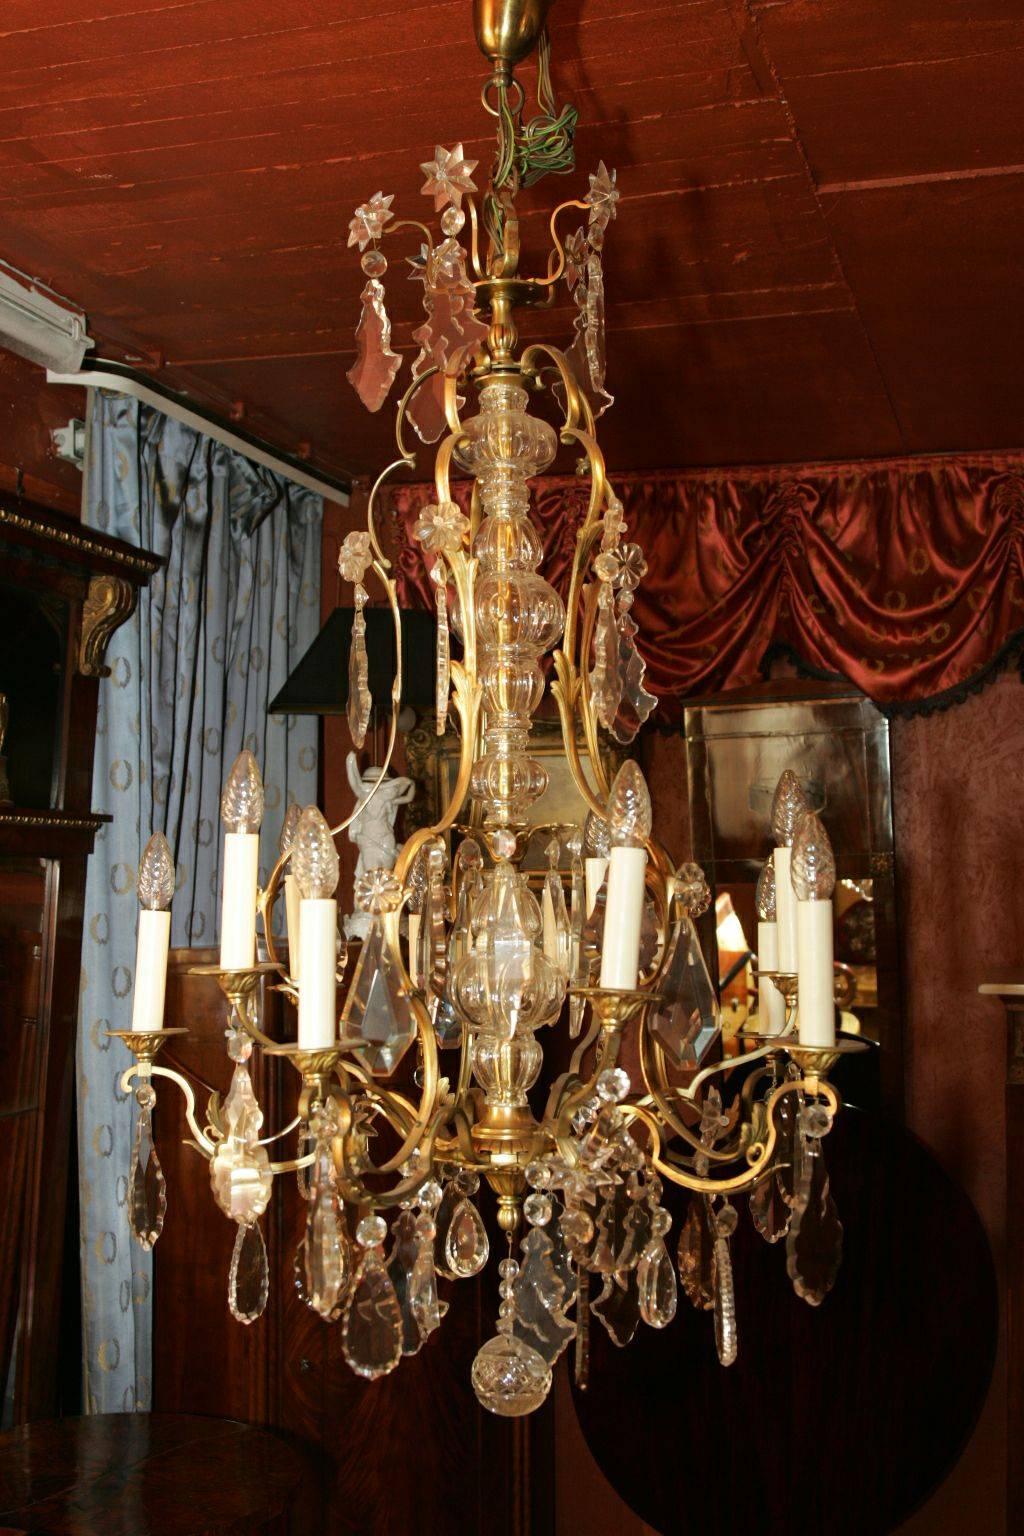 Antique French chandelier of the 18th century.
Frequently curled basket rods. In the center rising, multi-articulated baluster-shaped glass shaft with multiple crowns. Brass, chiselled. High baluster-shaped body with ten externally mounted flames.